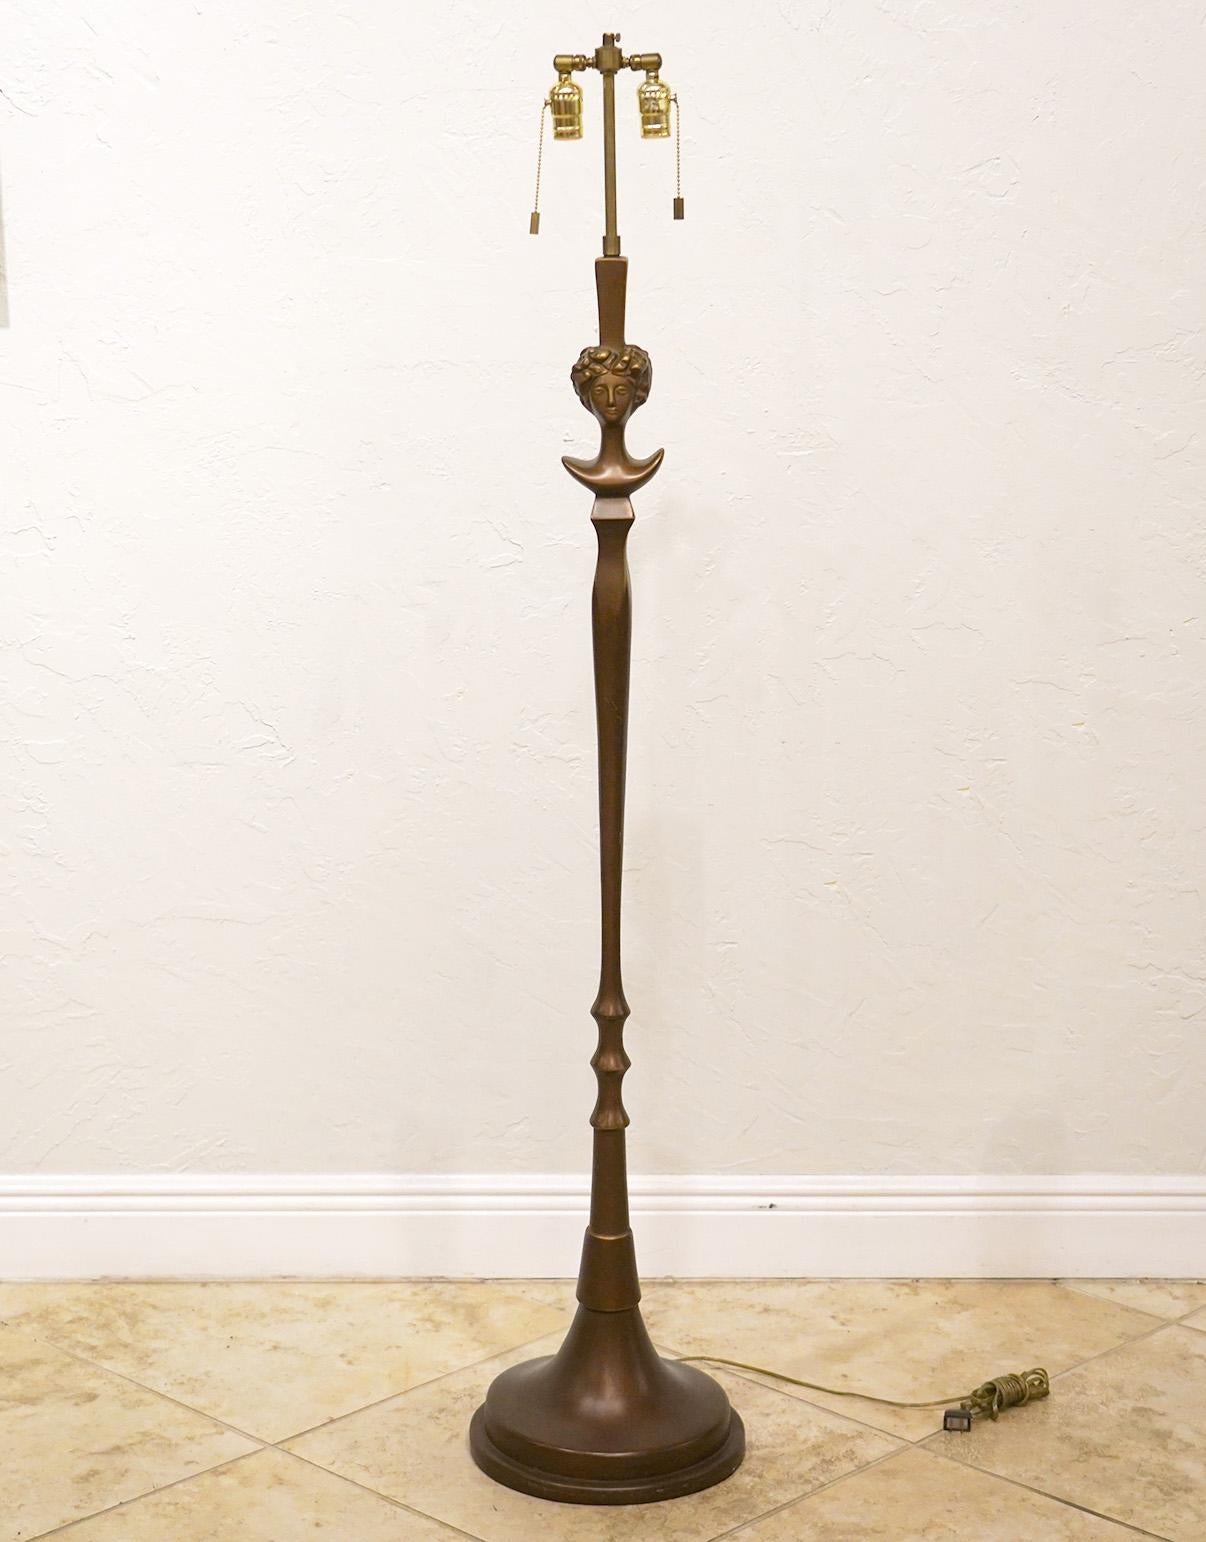 This artistic floor lamp by Sirmos, Long Island City, features a replica of Giacometti's sculpture lamp 'Tete de Femme'. Retaining its original Sirmos label it dates to around 1970 and is made of composite with a bronze style finish.